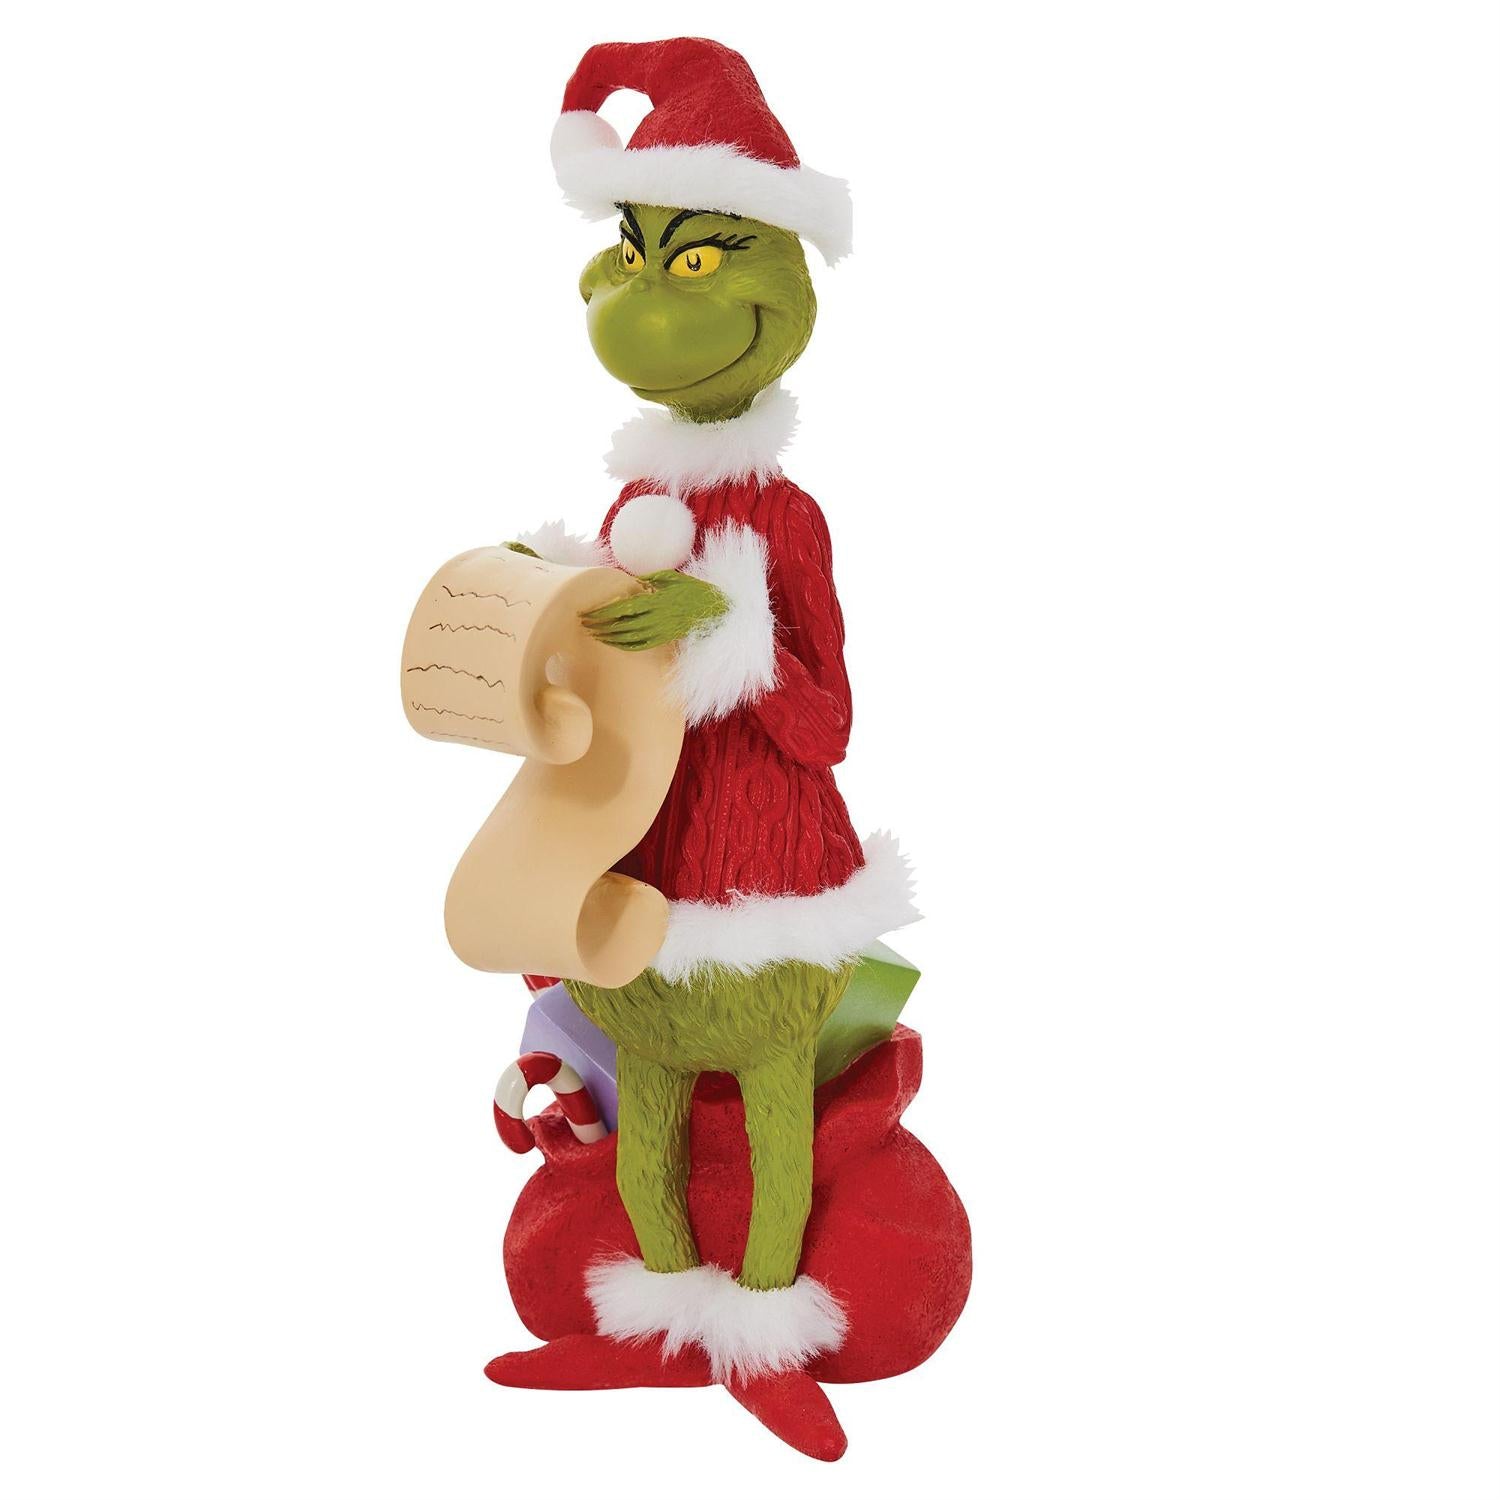 The Grinch Checking His List